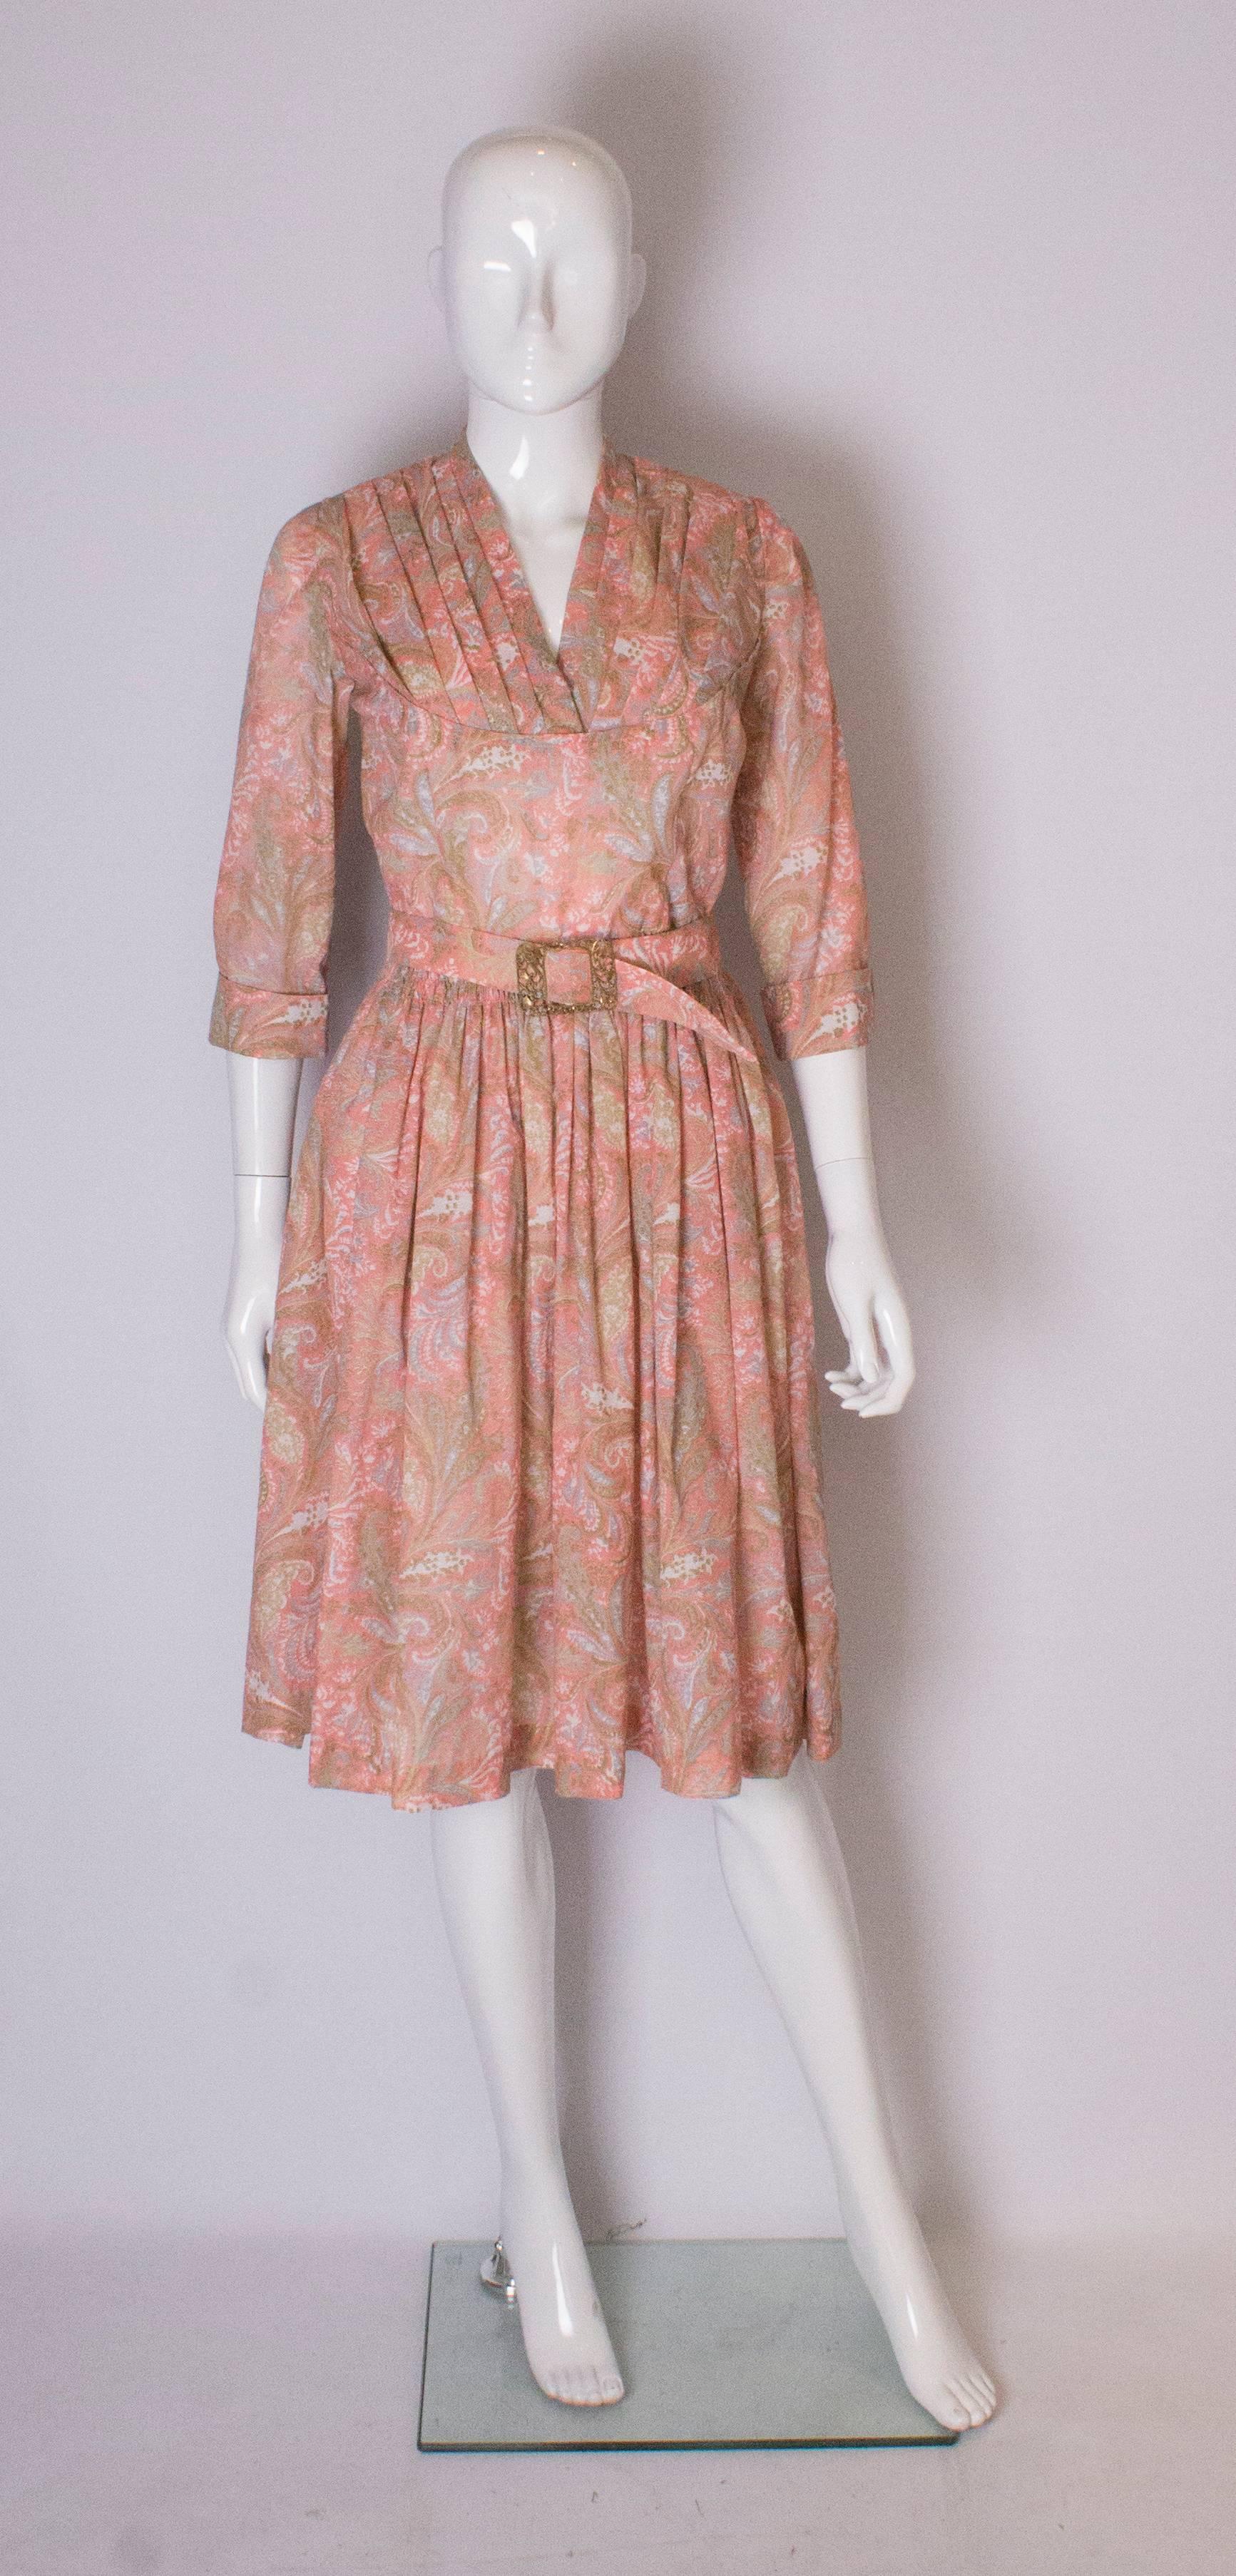 A pretty floral day dress with a v neckline with folds detail, and elbow length sleeves with cuffs . It has an elasticated waist  for easy wearing, and the dress has a self fabric belt with decorative buckle.